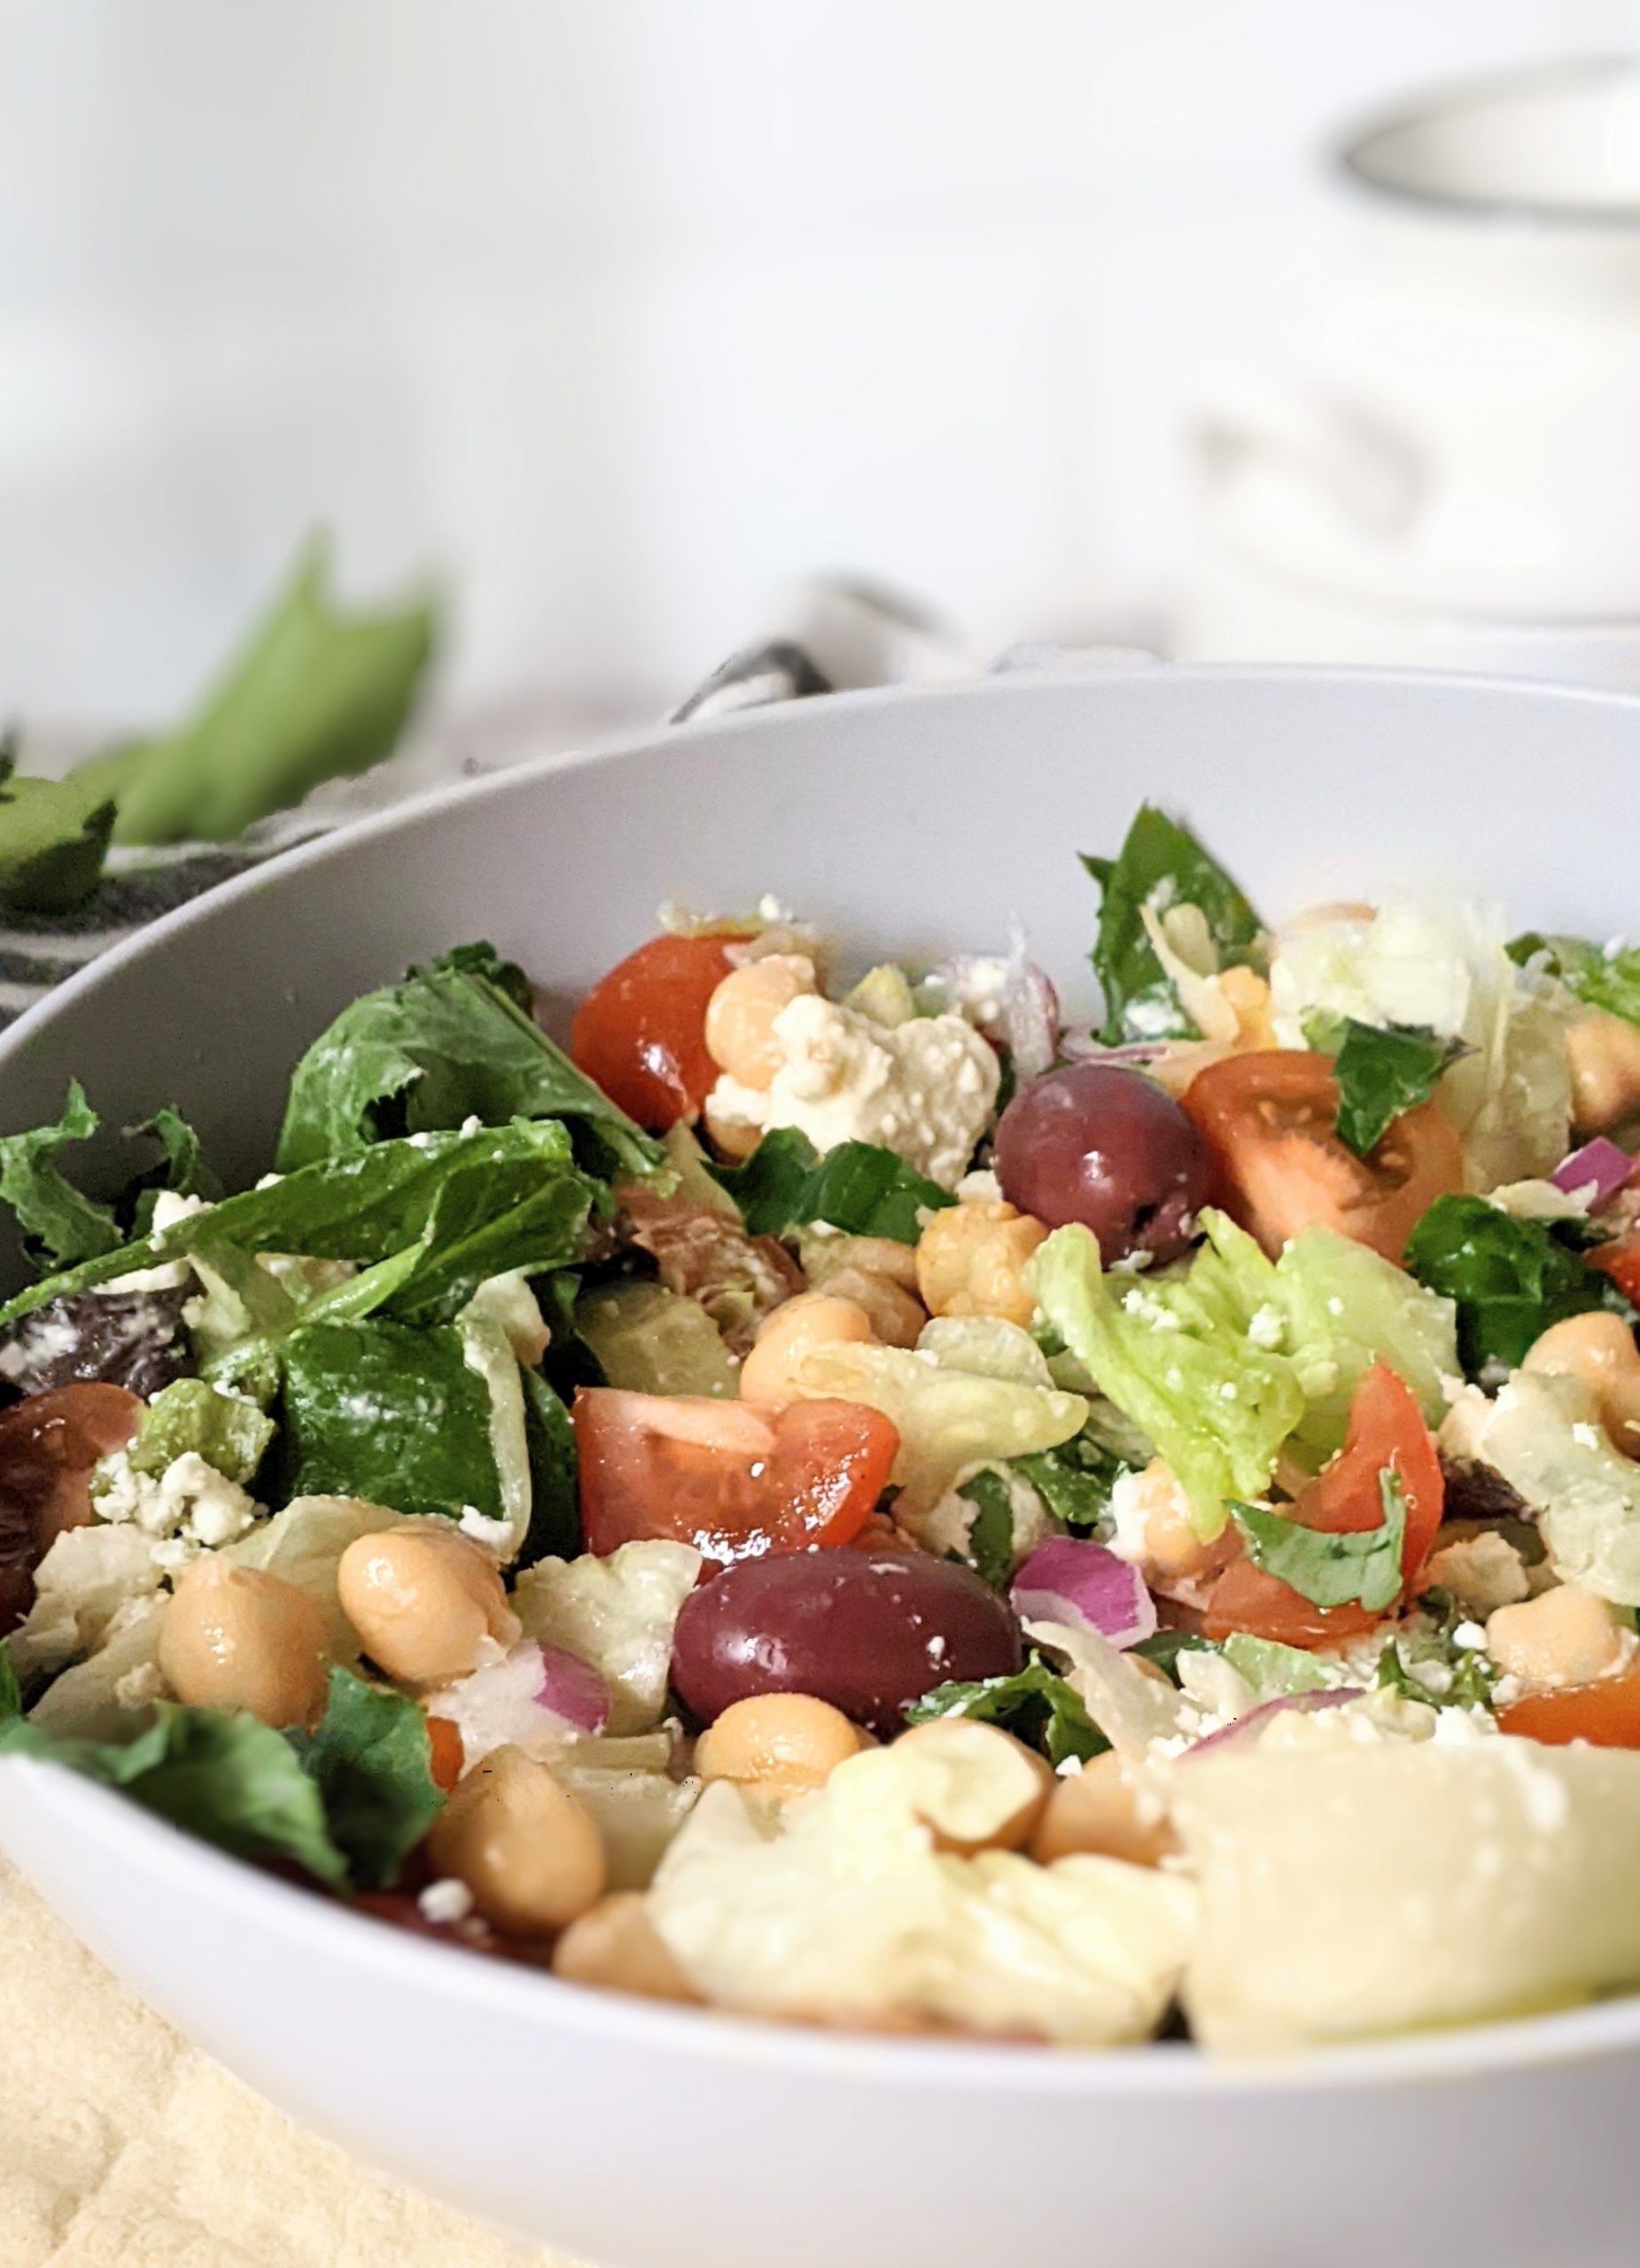 chickpea chopped salad recipe with greek olives and cucumbers healthy high protein vegan lunches with chickpeas garbanzo bean salad with greek dressing and tomatoes spinach and iceberg lettuce